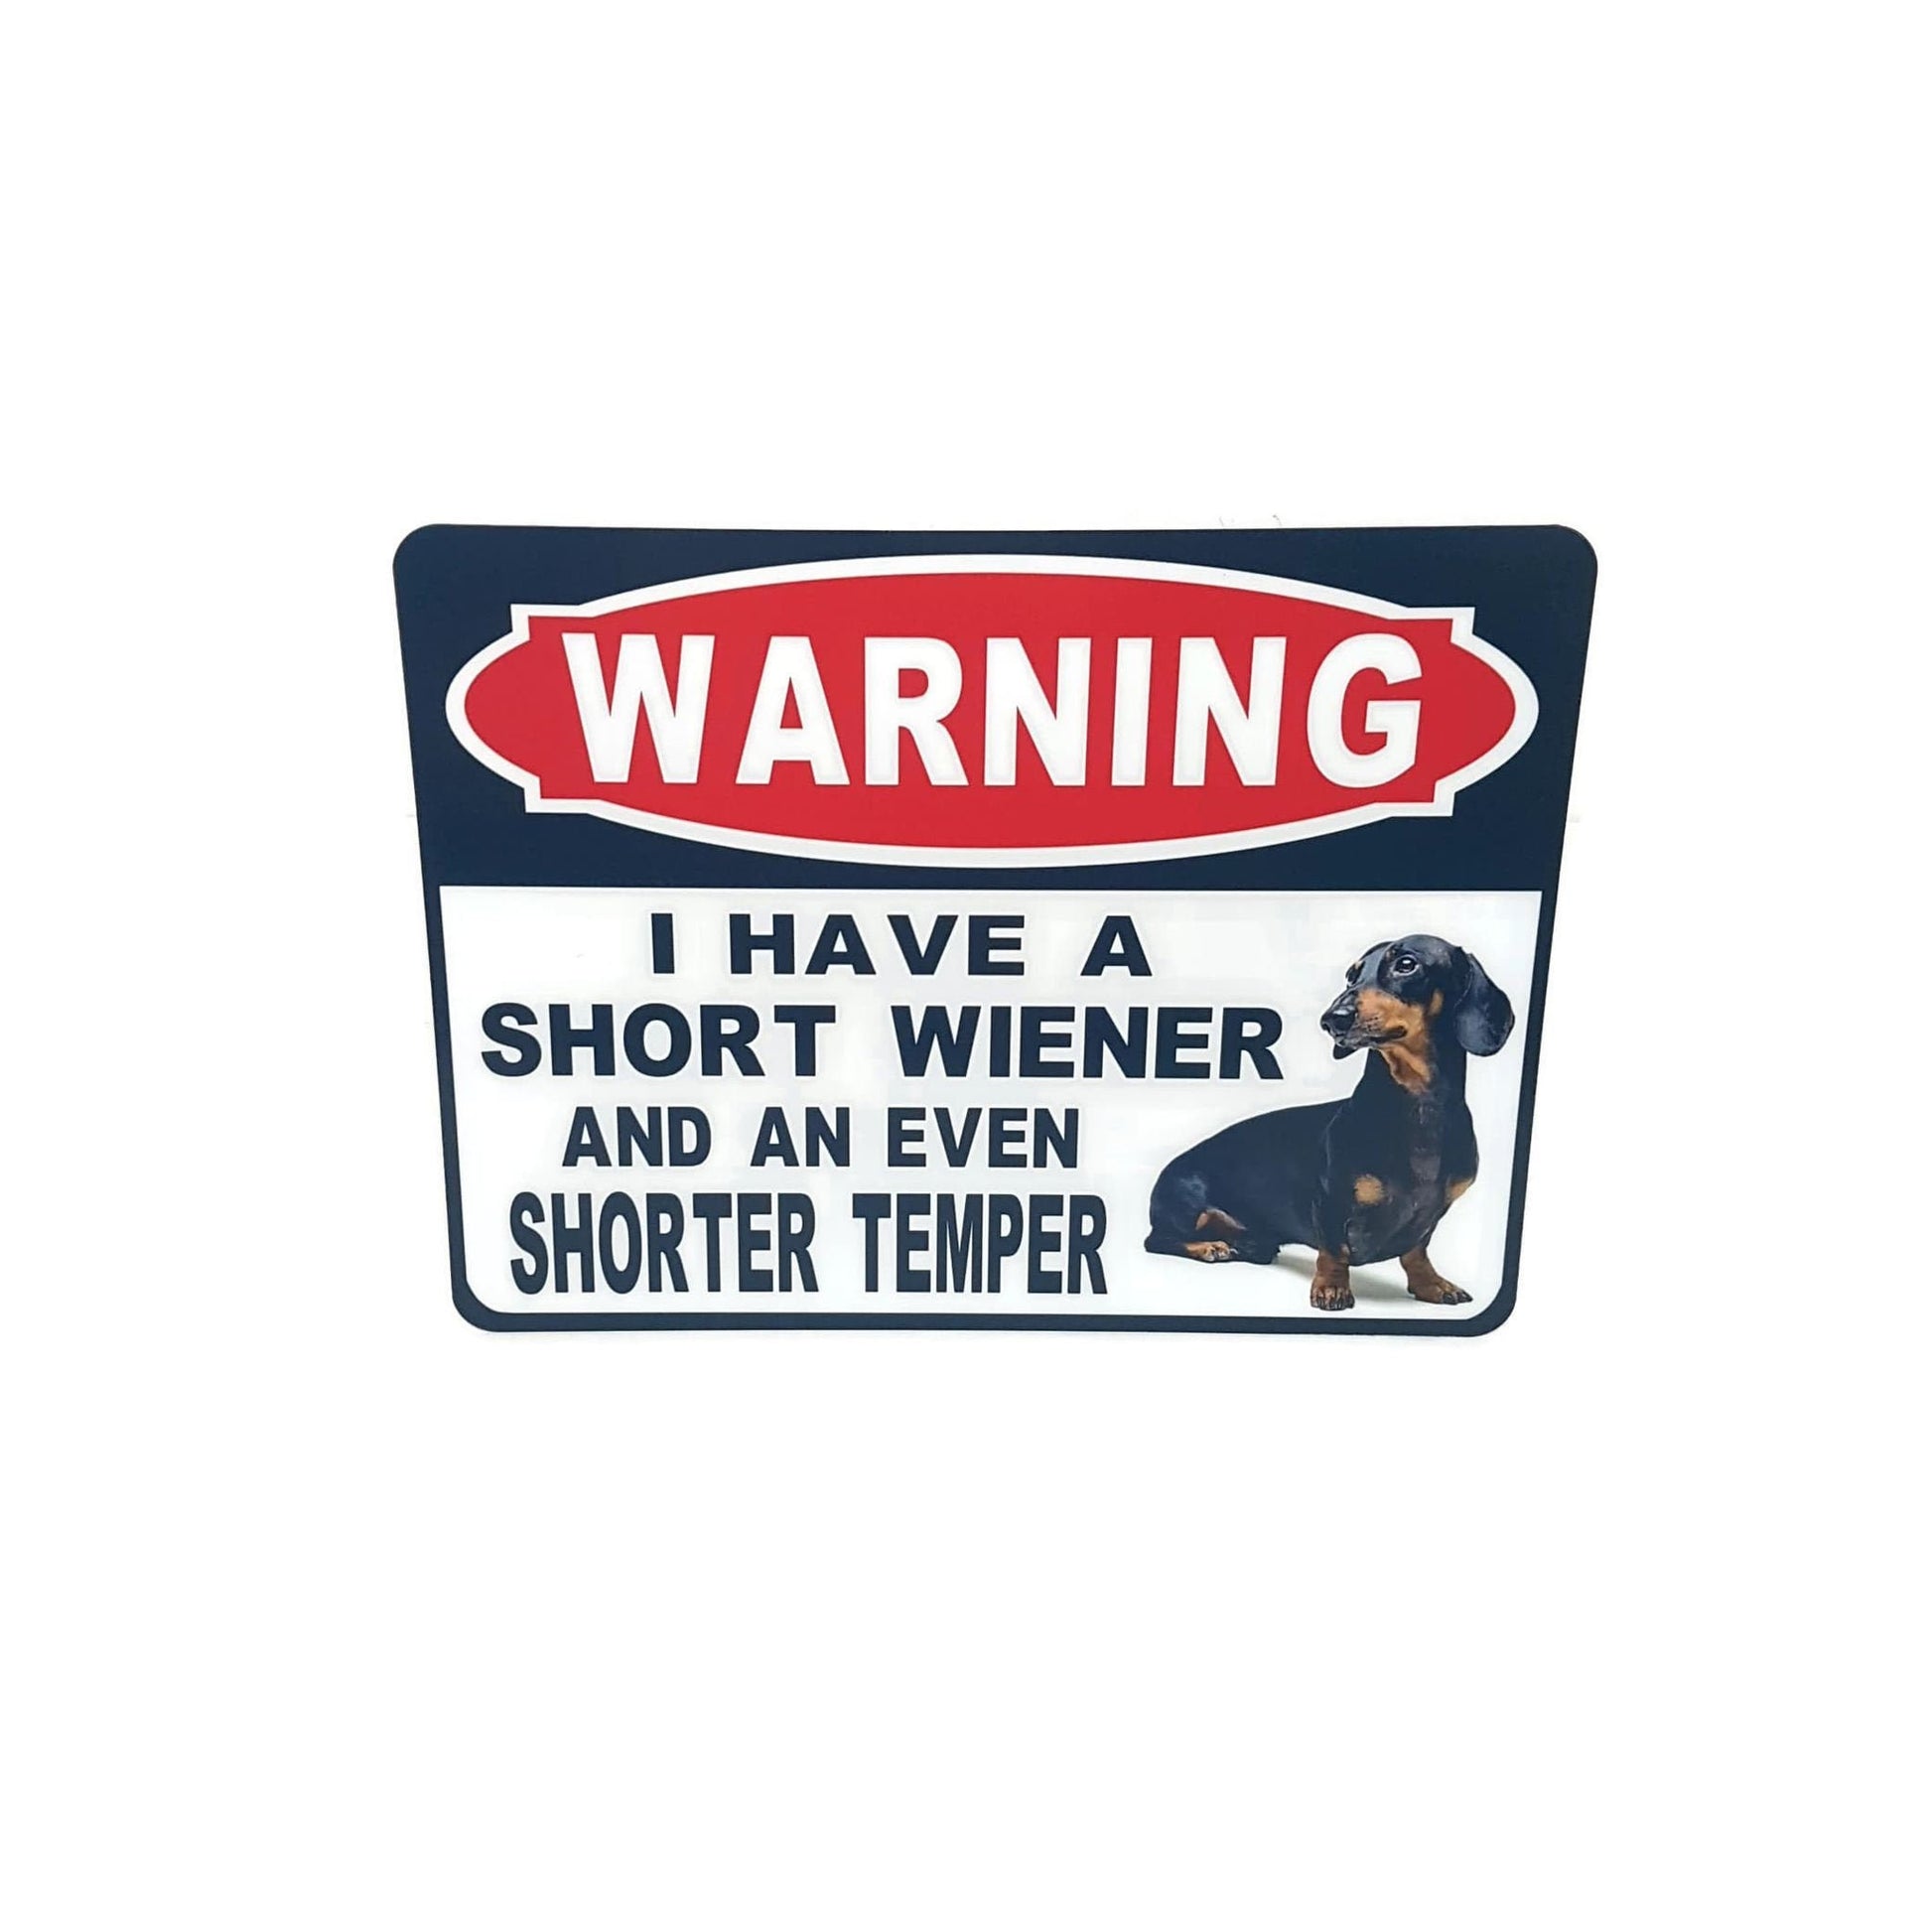 warning i have a short wiener and even a shorter temper  funny sign